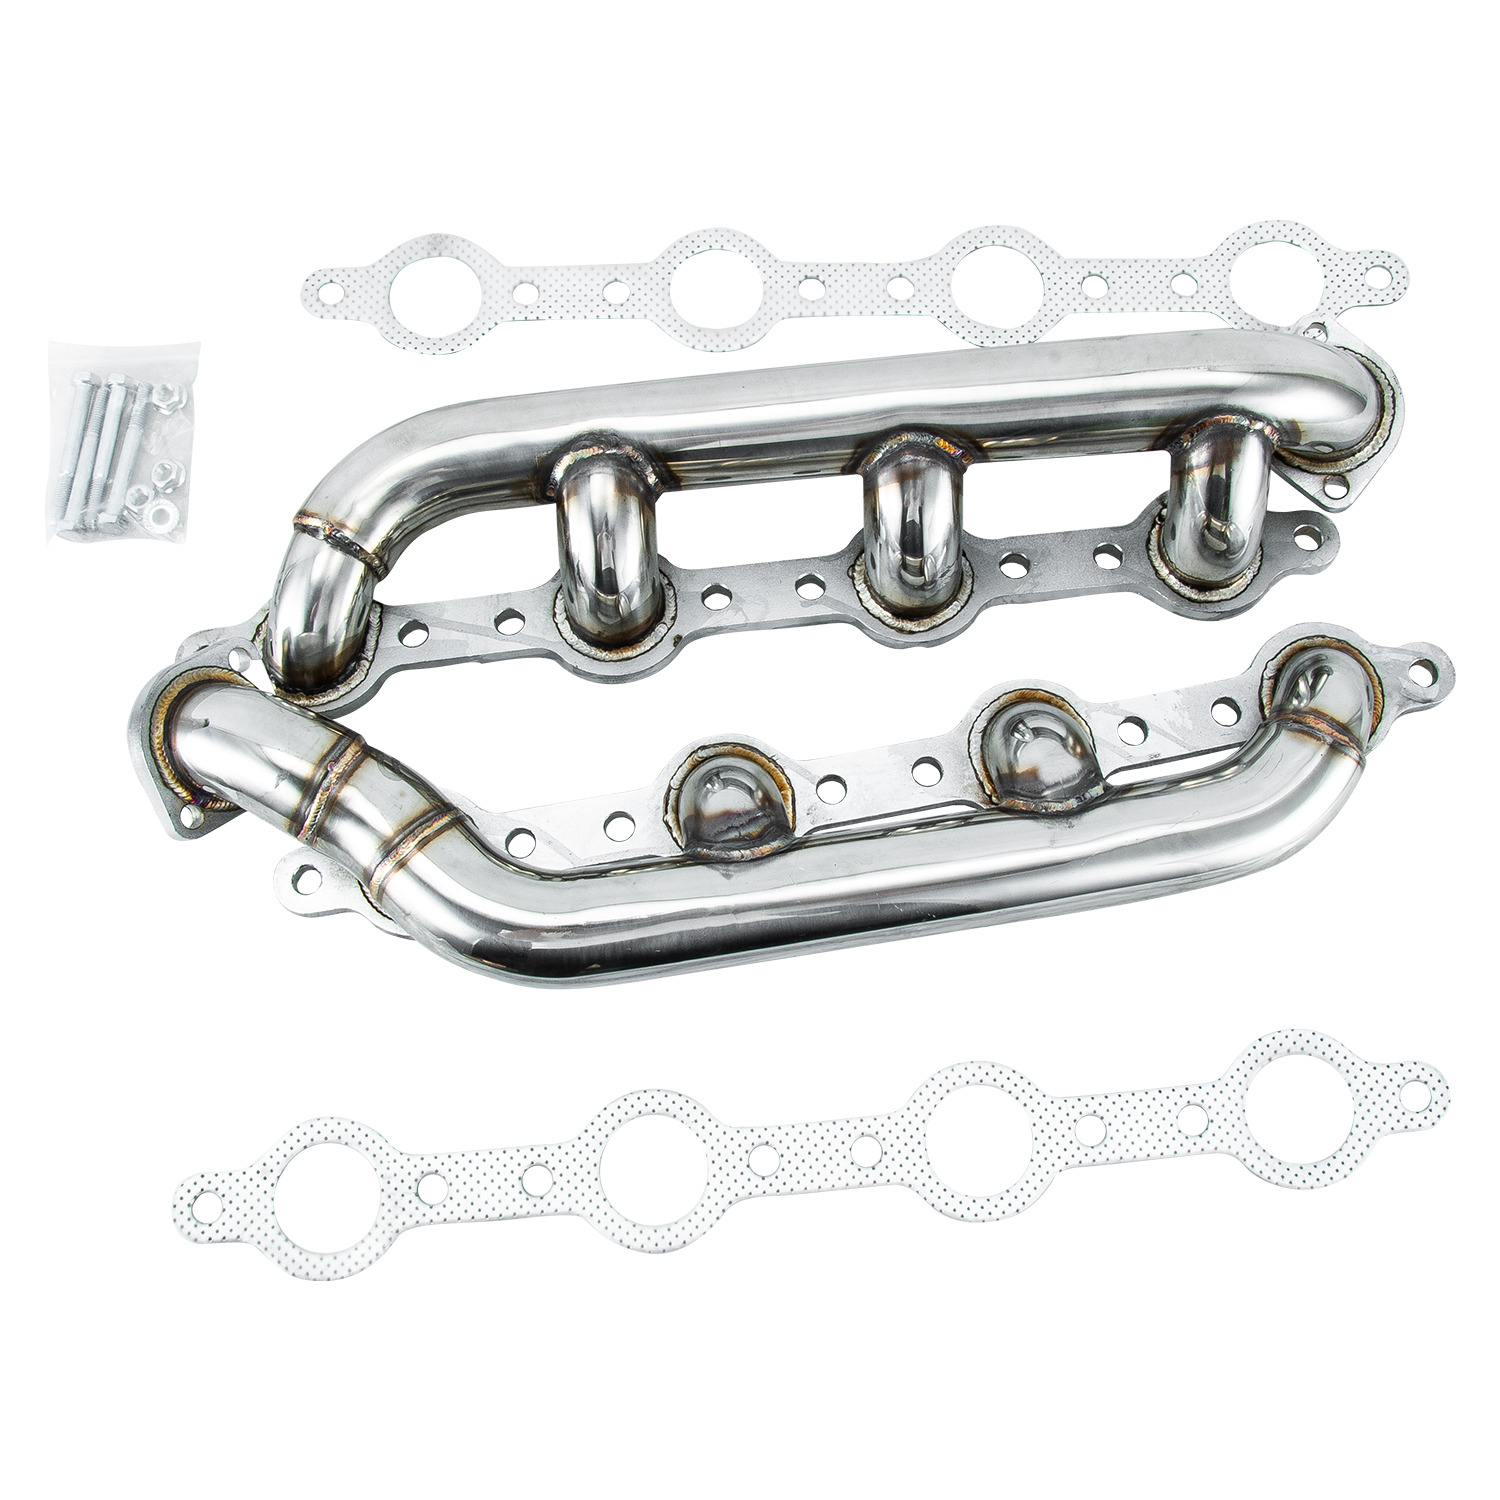 For 1999-2003 2002 Ford F250 F350 F450 7.3L Stainless Steel Headers Manifolds